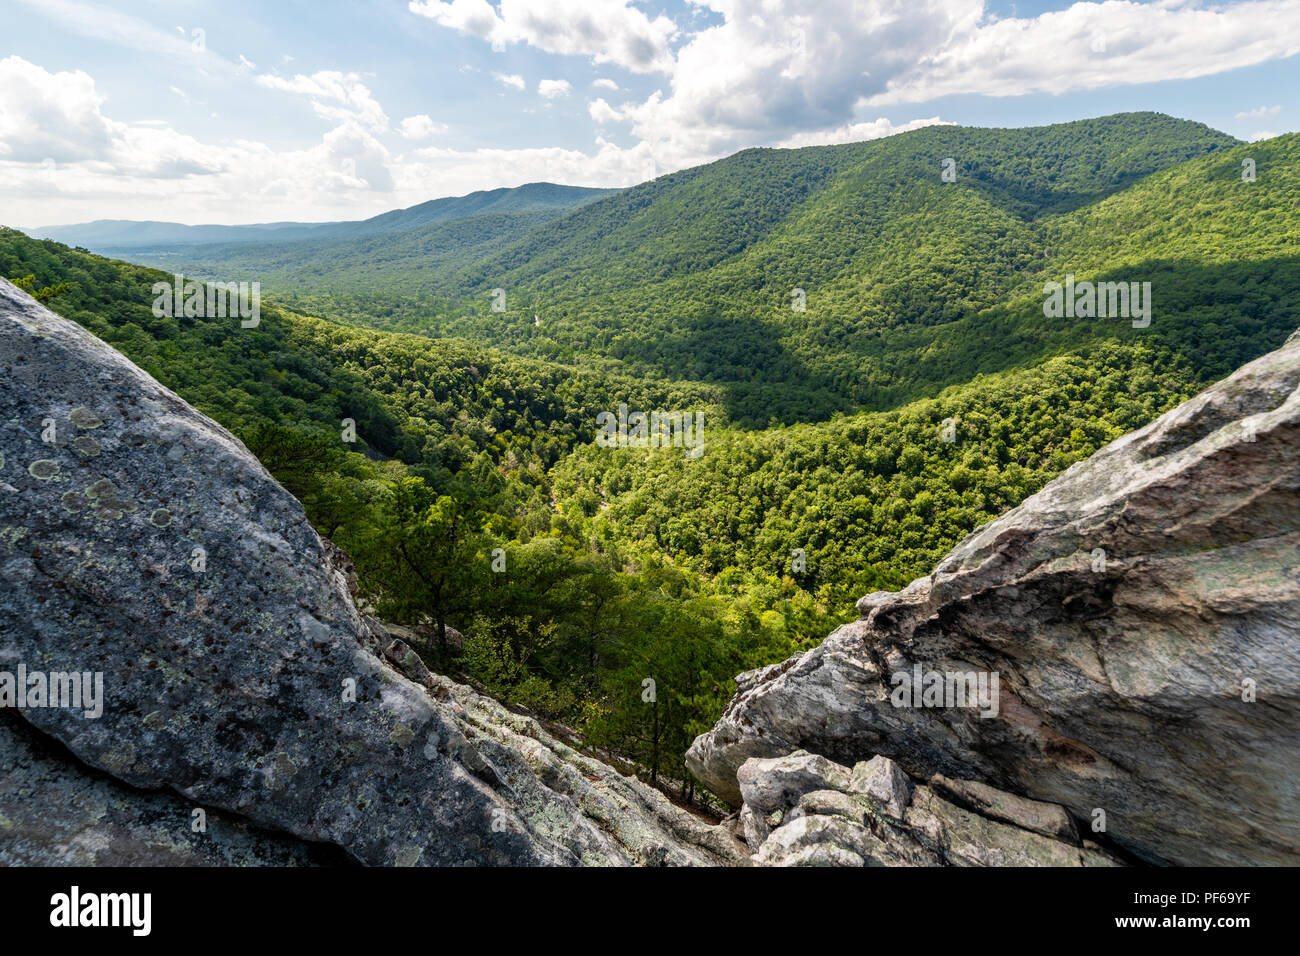 Views from the top of the Buzzard Rock hike on Massanutten Mountain in the Appalachian Mountains of western Virginia, near Shenandoah National Park Stock Photo